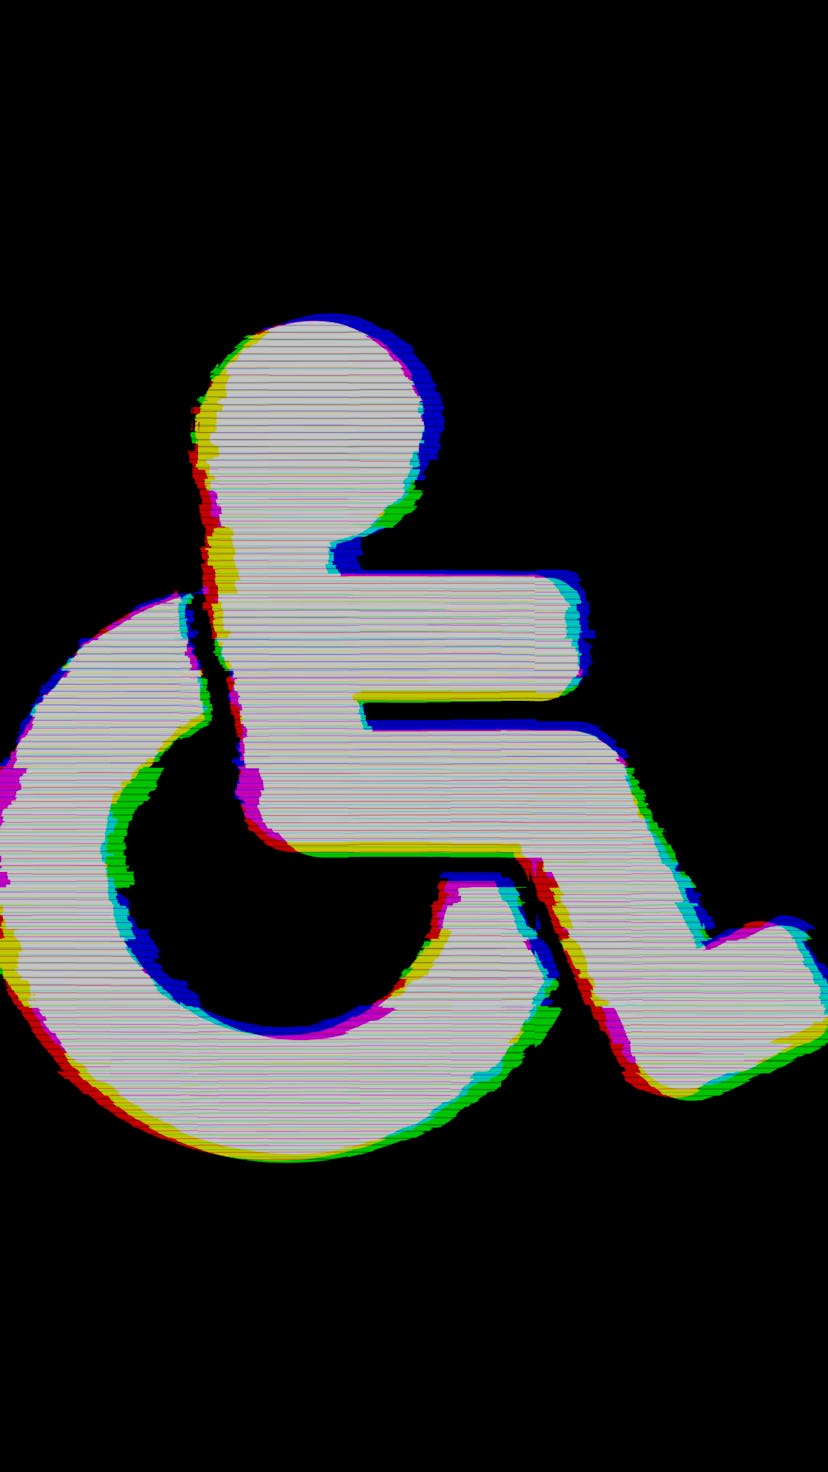 Symbol wheelchair has defects. Glitch and stripes  